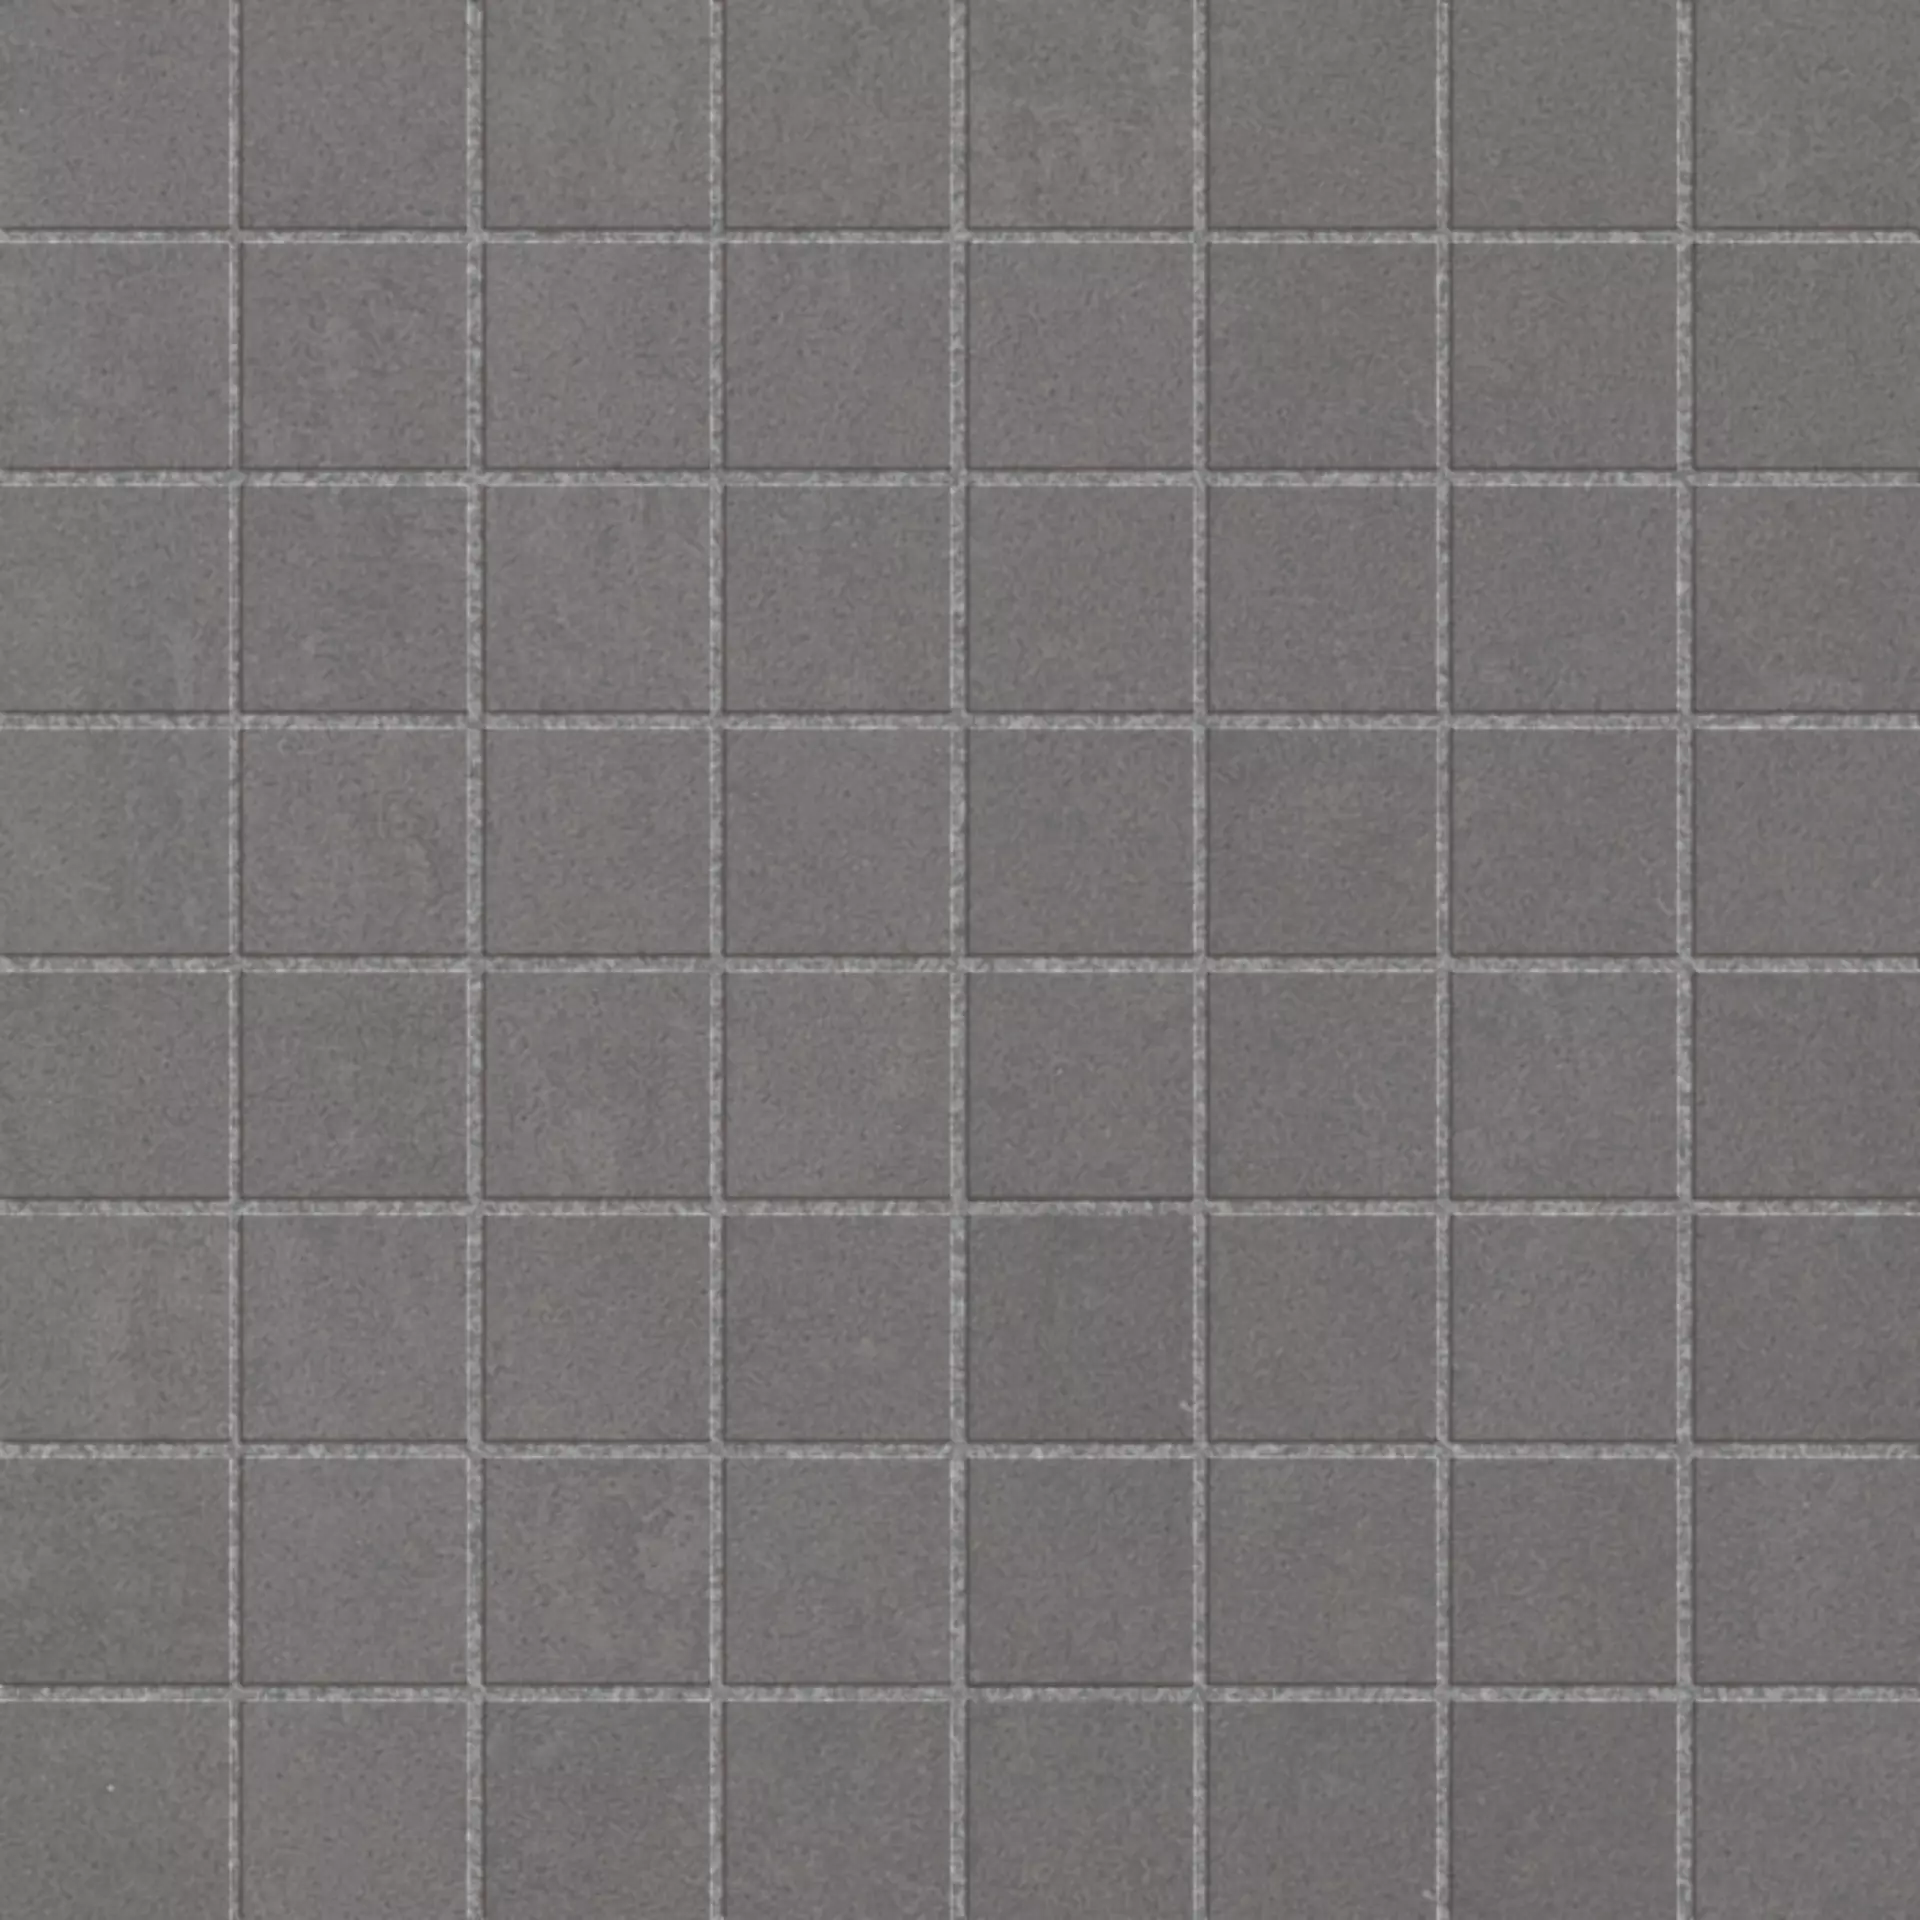 Margres Time 2.0 Carbon Natural Mosaic 3,5x3,5 B25M33T28BF 30x30cm rectified 10,5mm